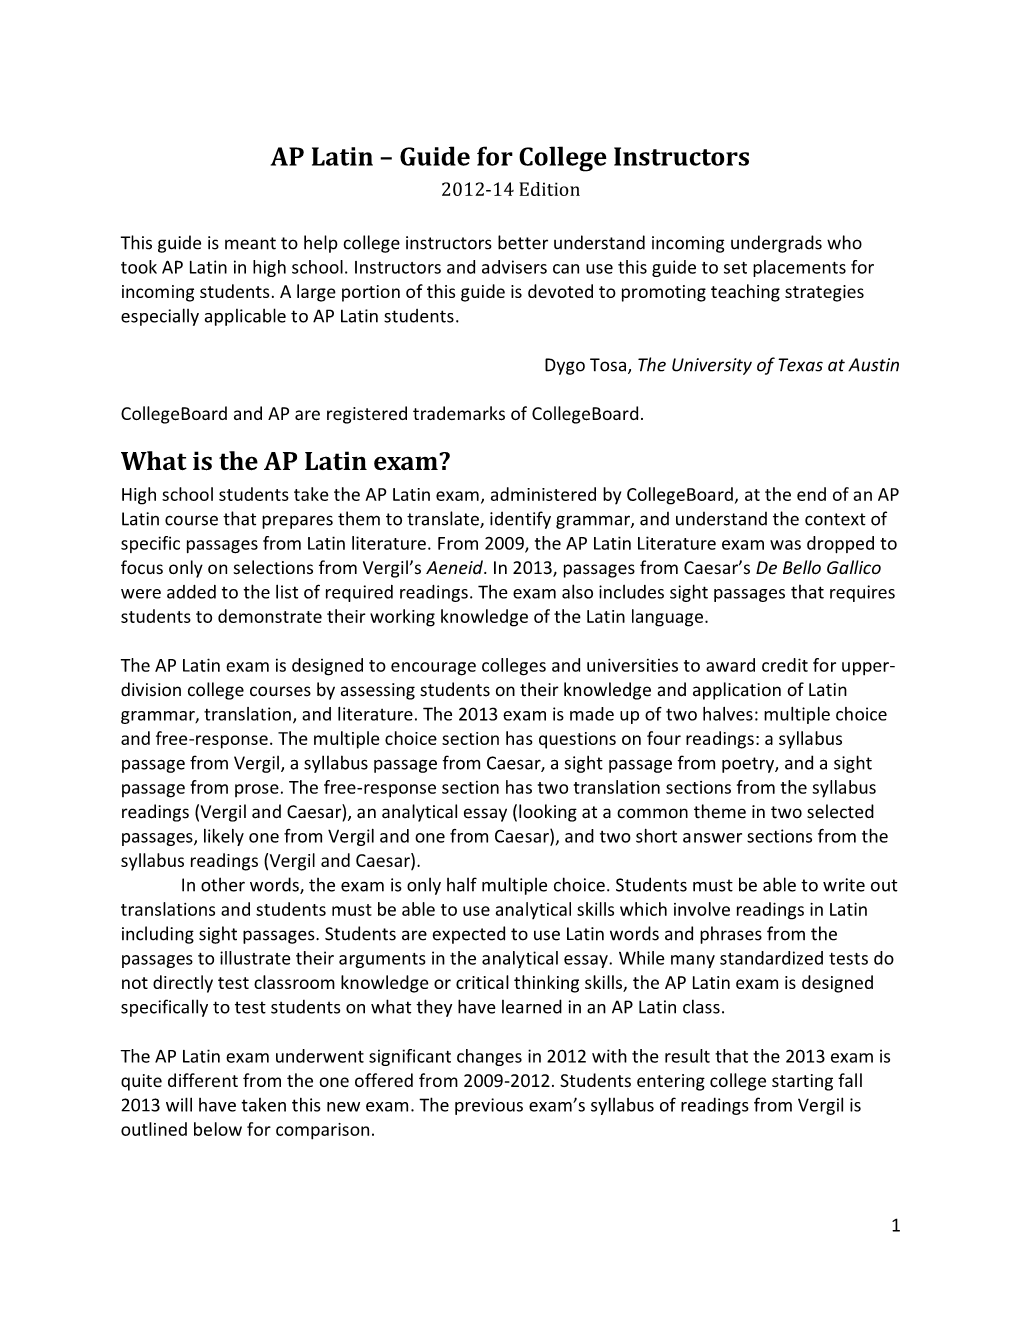 AP Latin – Guide for College Instructors 2012-14 Edition